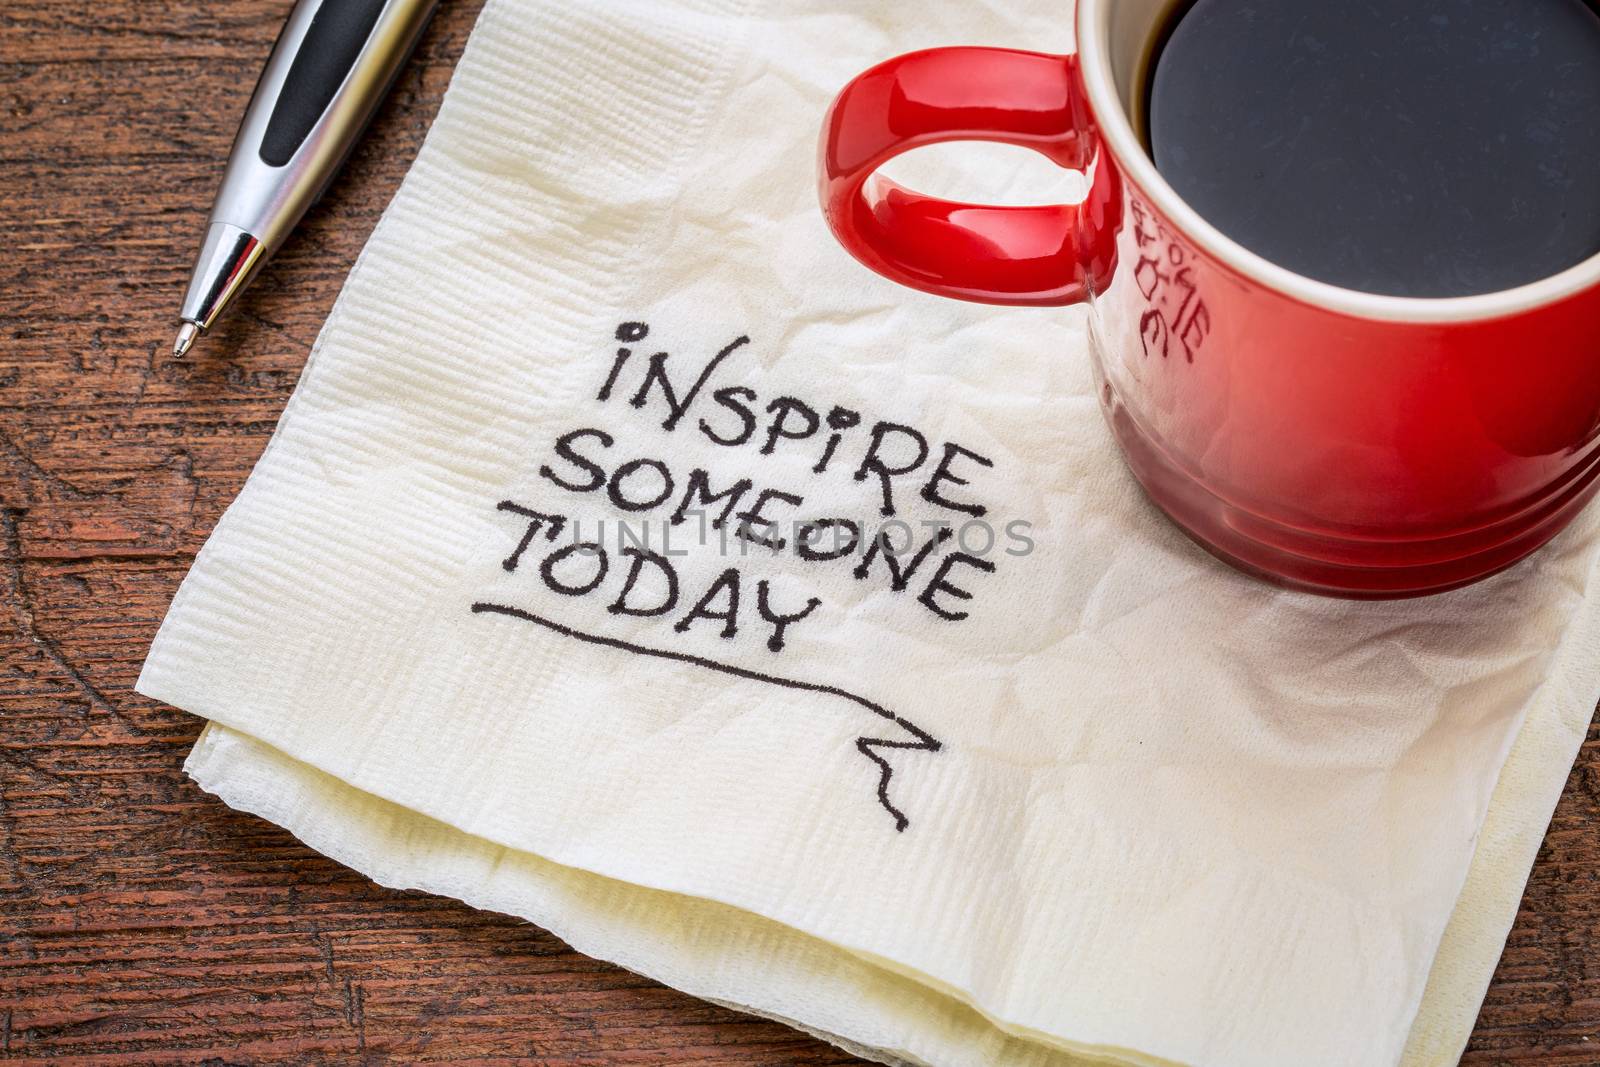 inspire someone today by PixelsAway